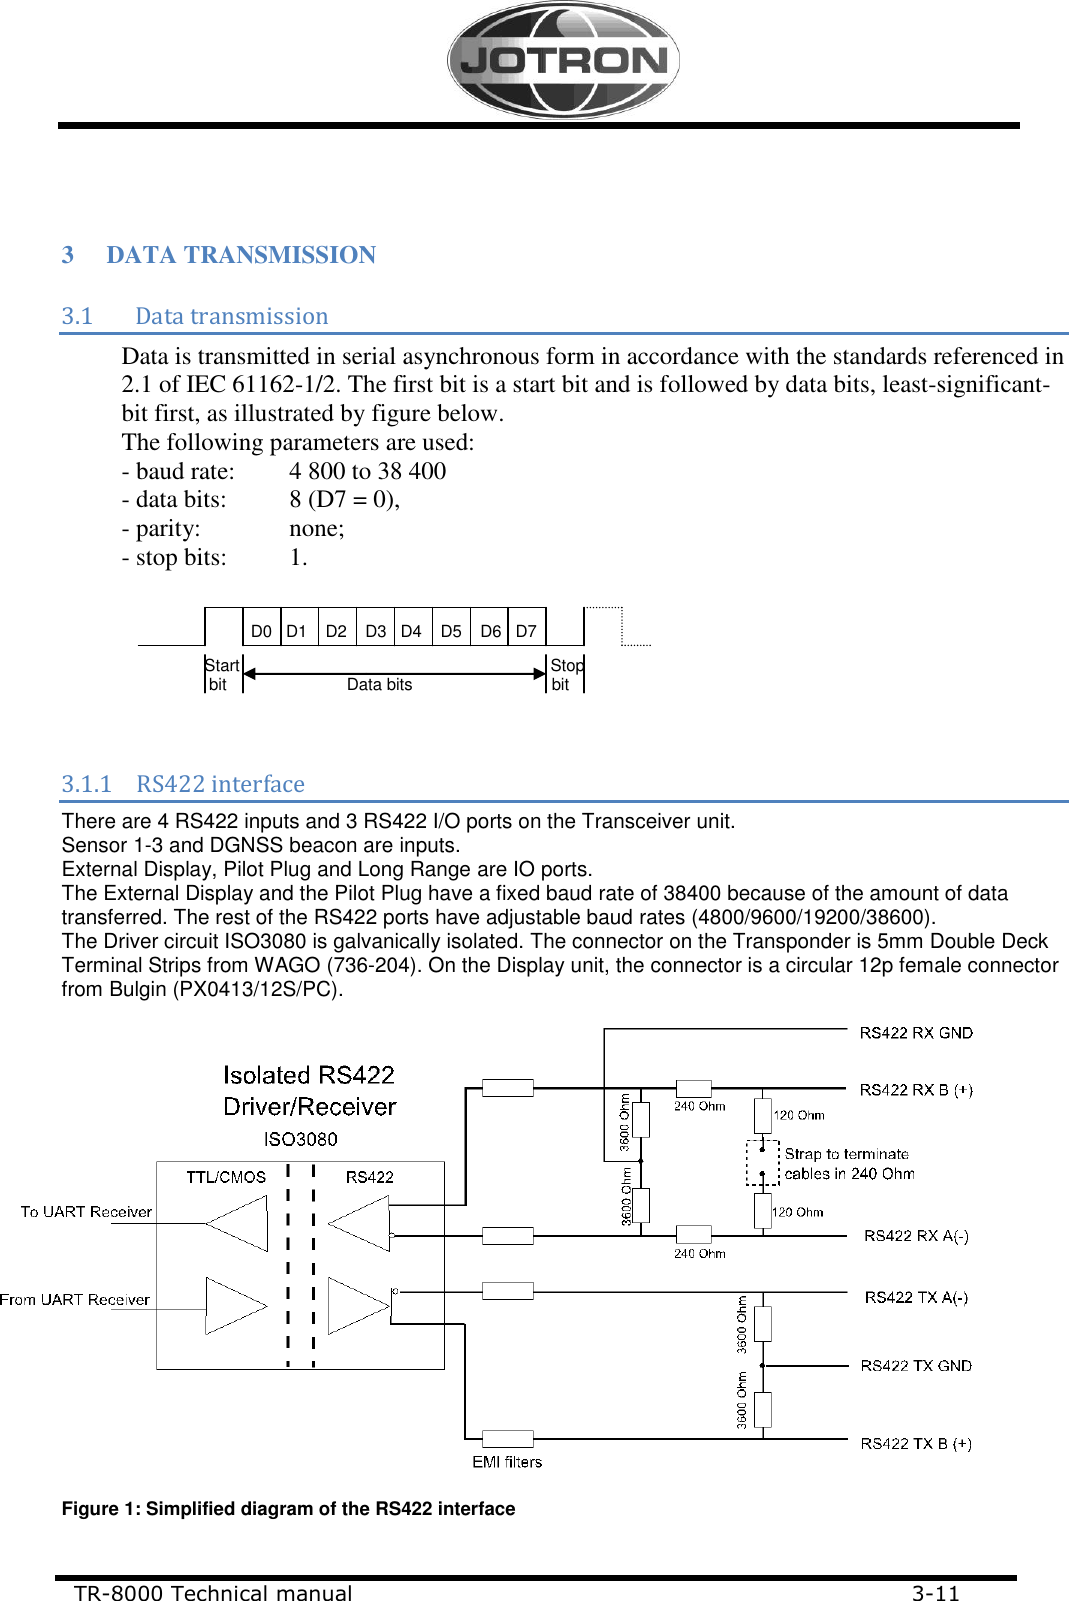     TR-8000 Technical manual                             3-11                                           3 DATA TRANSMISSION 3.1 Data transmission Data is transmitted in serial asynchronous form in accordance with the standards referenced in 2.1 of IEC 61162-1/2. The first bit is a start bit and is followed by data bits, least-significant-bit first, as illustrated by figure below. The following parameters are used: - baud rate:   4 800 to 38 400  - data bits:   8 (D7 = 0),  - parity:     none; - stop bits:   1.        3.1.1 RS422 interface There are 4 RS422 inputs and 3 RS422 I/O ports on the Transceiver unit. Sensor 1-3 and DGNSS beacon are inputs. External Display, Pilot Plug and Long Range are IO ports. The External Display and the Pilot Plug have a fixed baud rate of 38400 because of the amount of data transferred. The rest of the RS422 ports have adjustable baud rates (4800/9600/19200/38600). The Driver circuit ISO3080 is galvanically isolated. The connector on the Transponder is 5mm Double Deck Terminal Strips from WAGO (736-204). On the Display unit, the connector is a circular 12p female connector from Bulgin (PX0413/12S/PC).                     Figure 1: Simplified diagram of the RS422 interface                         D0   D1    D2    D3   D4    D5    D6   D7                 Start                Stop               bit                          Data bits                              bit             